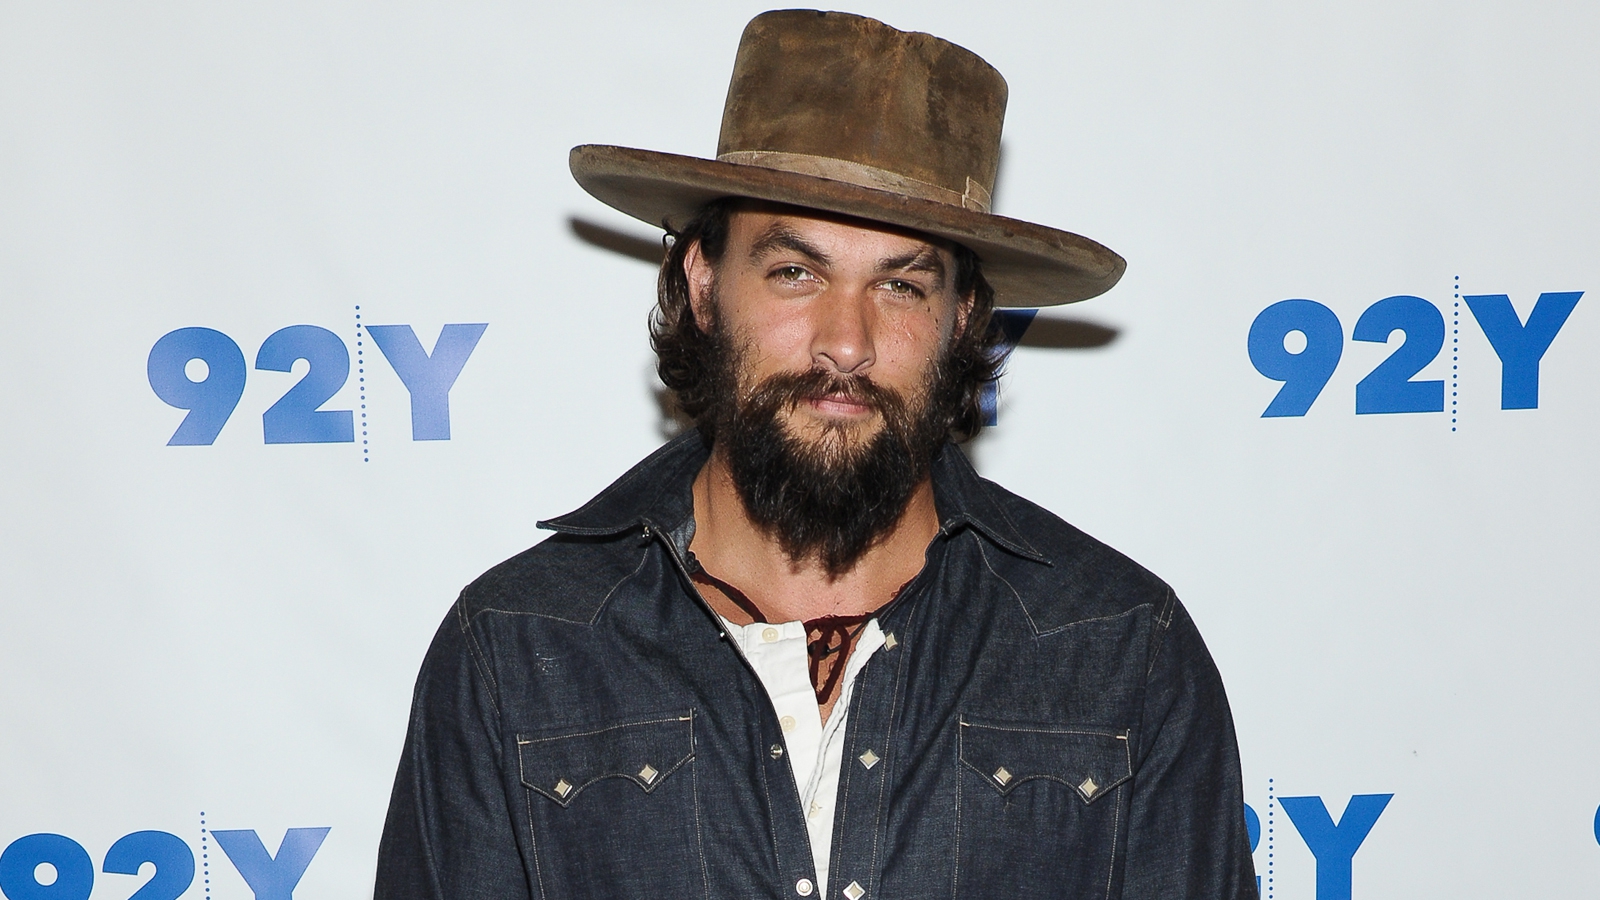 Watch! Jason Momoa's Game of Thrones audition